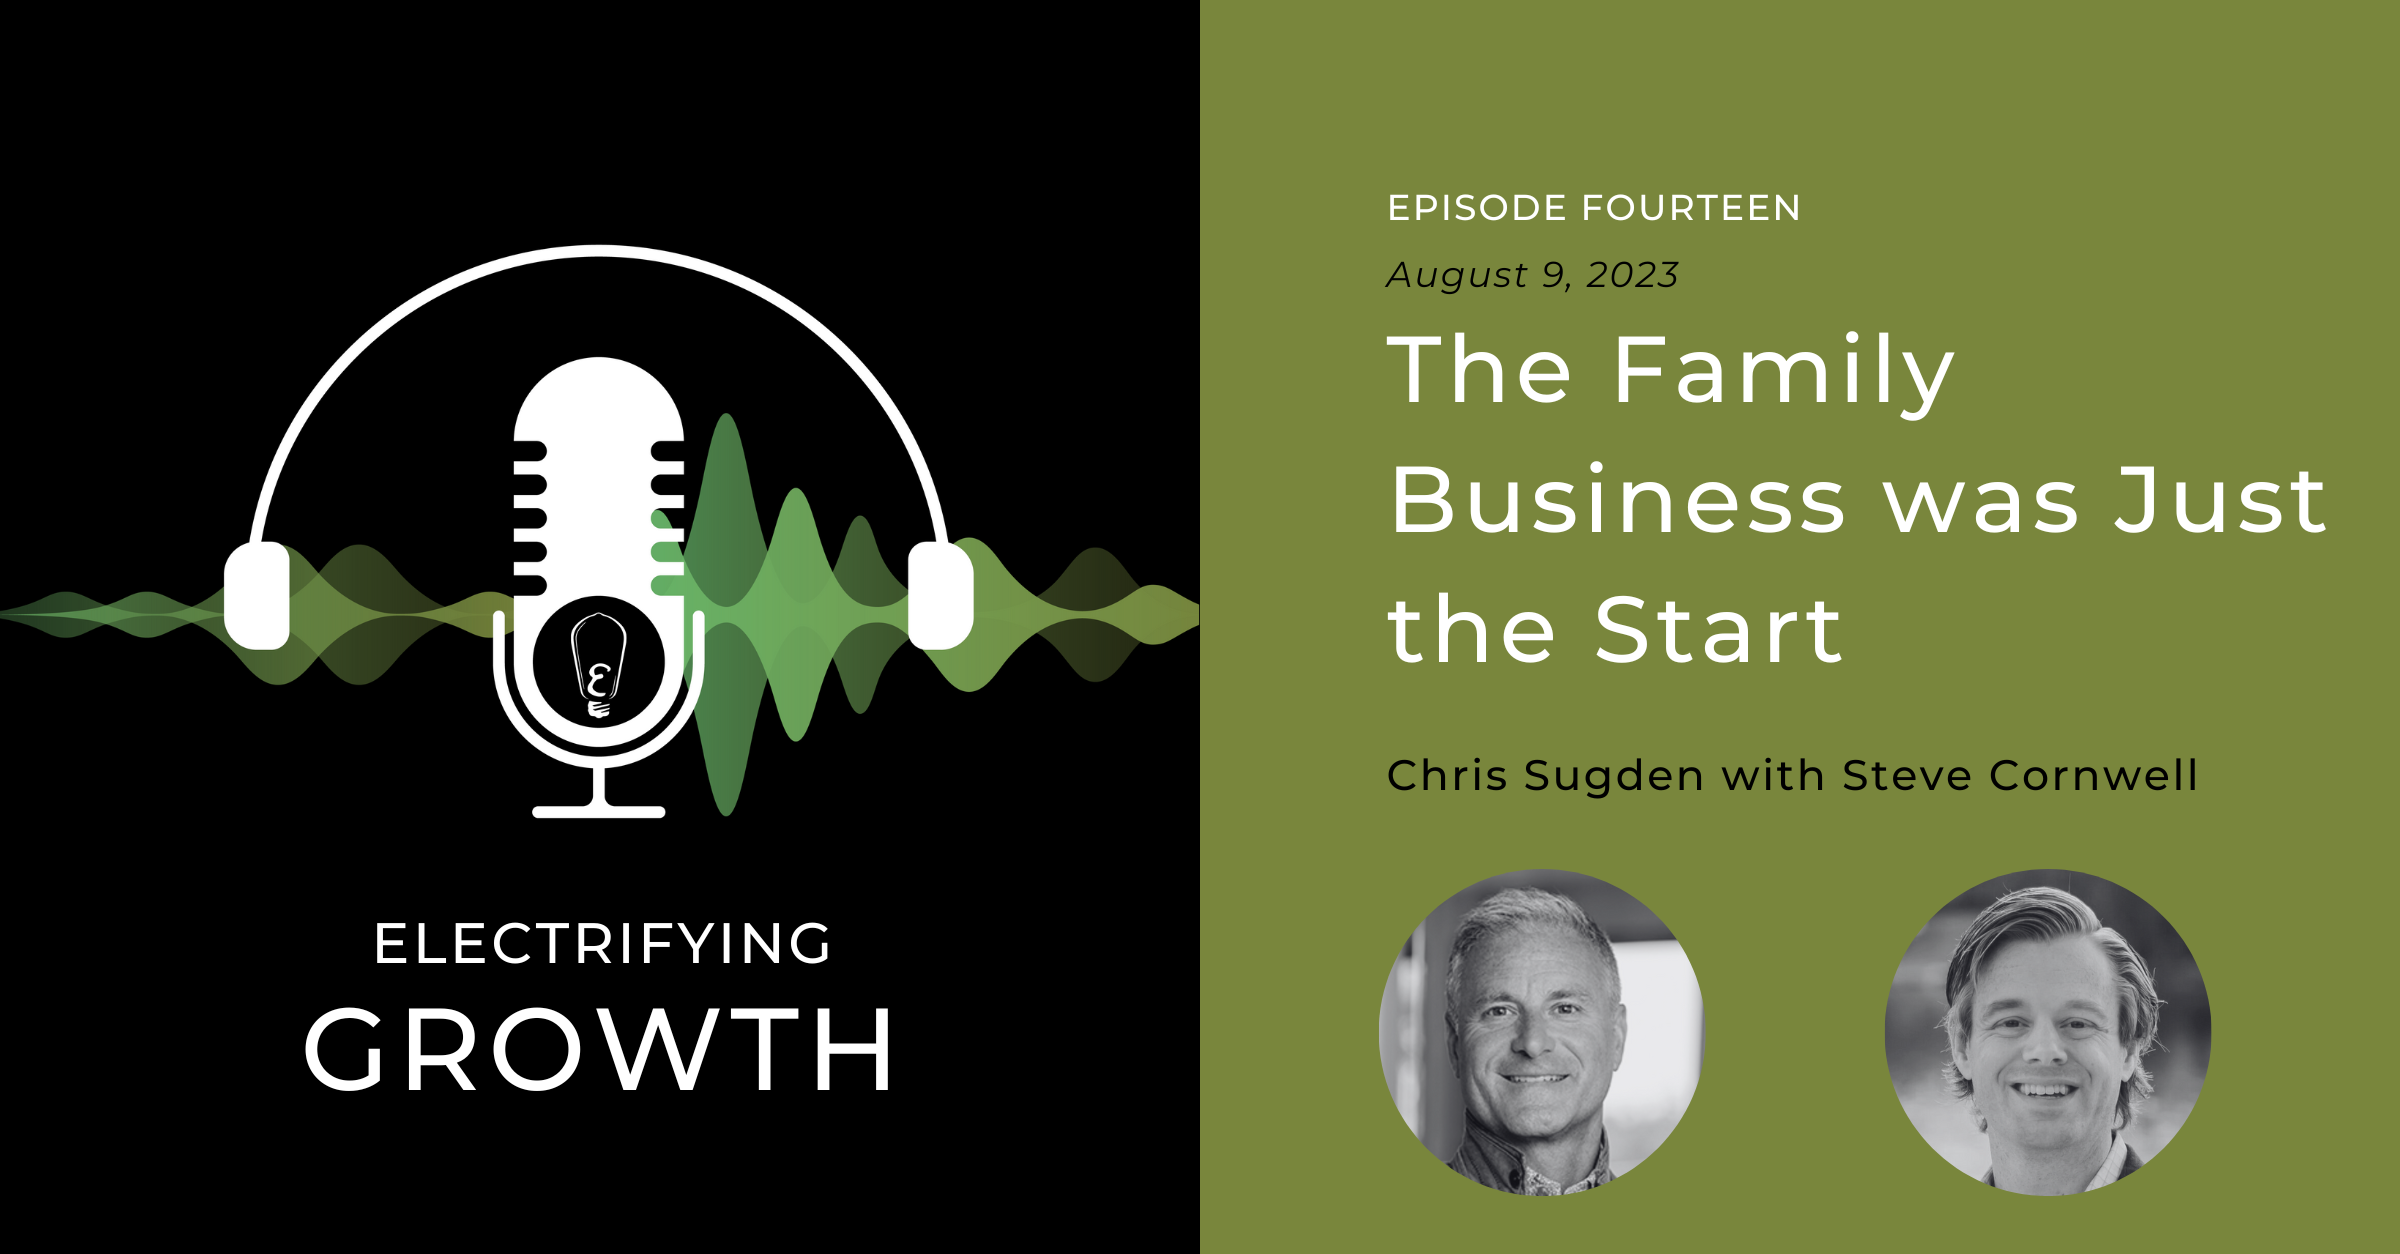 Electrifying Growth Episode 14: The Family Business was Just the Start with Steve Cornwell